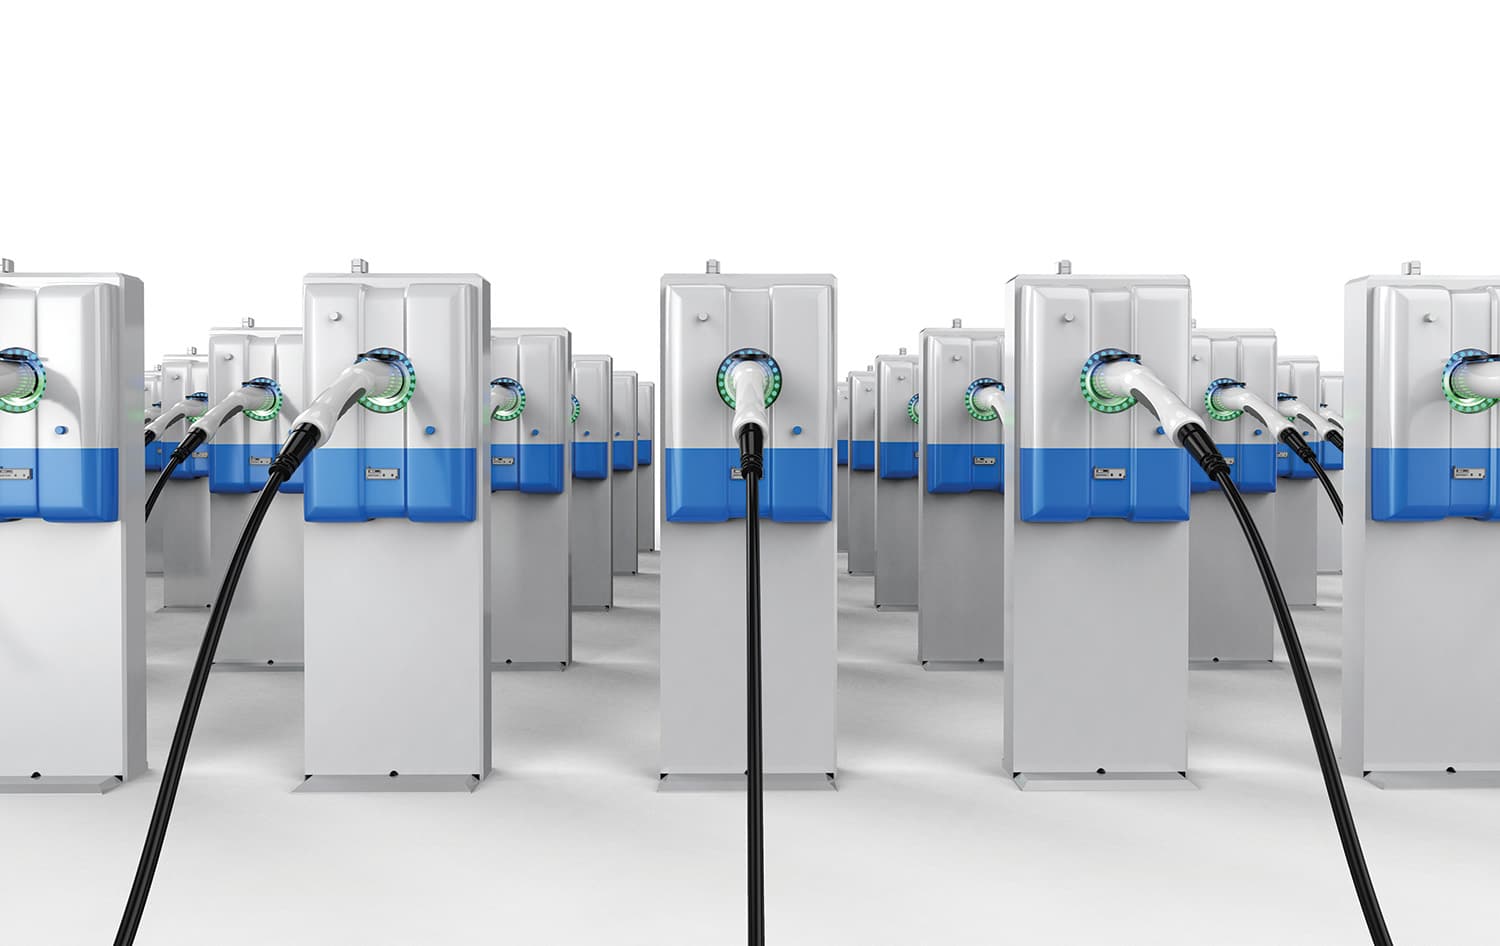 A row of electric charging stations with blue and white cables.